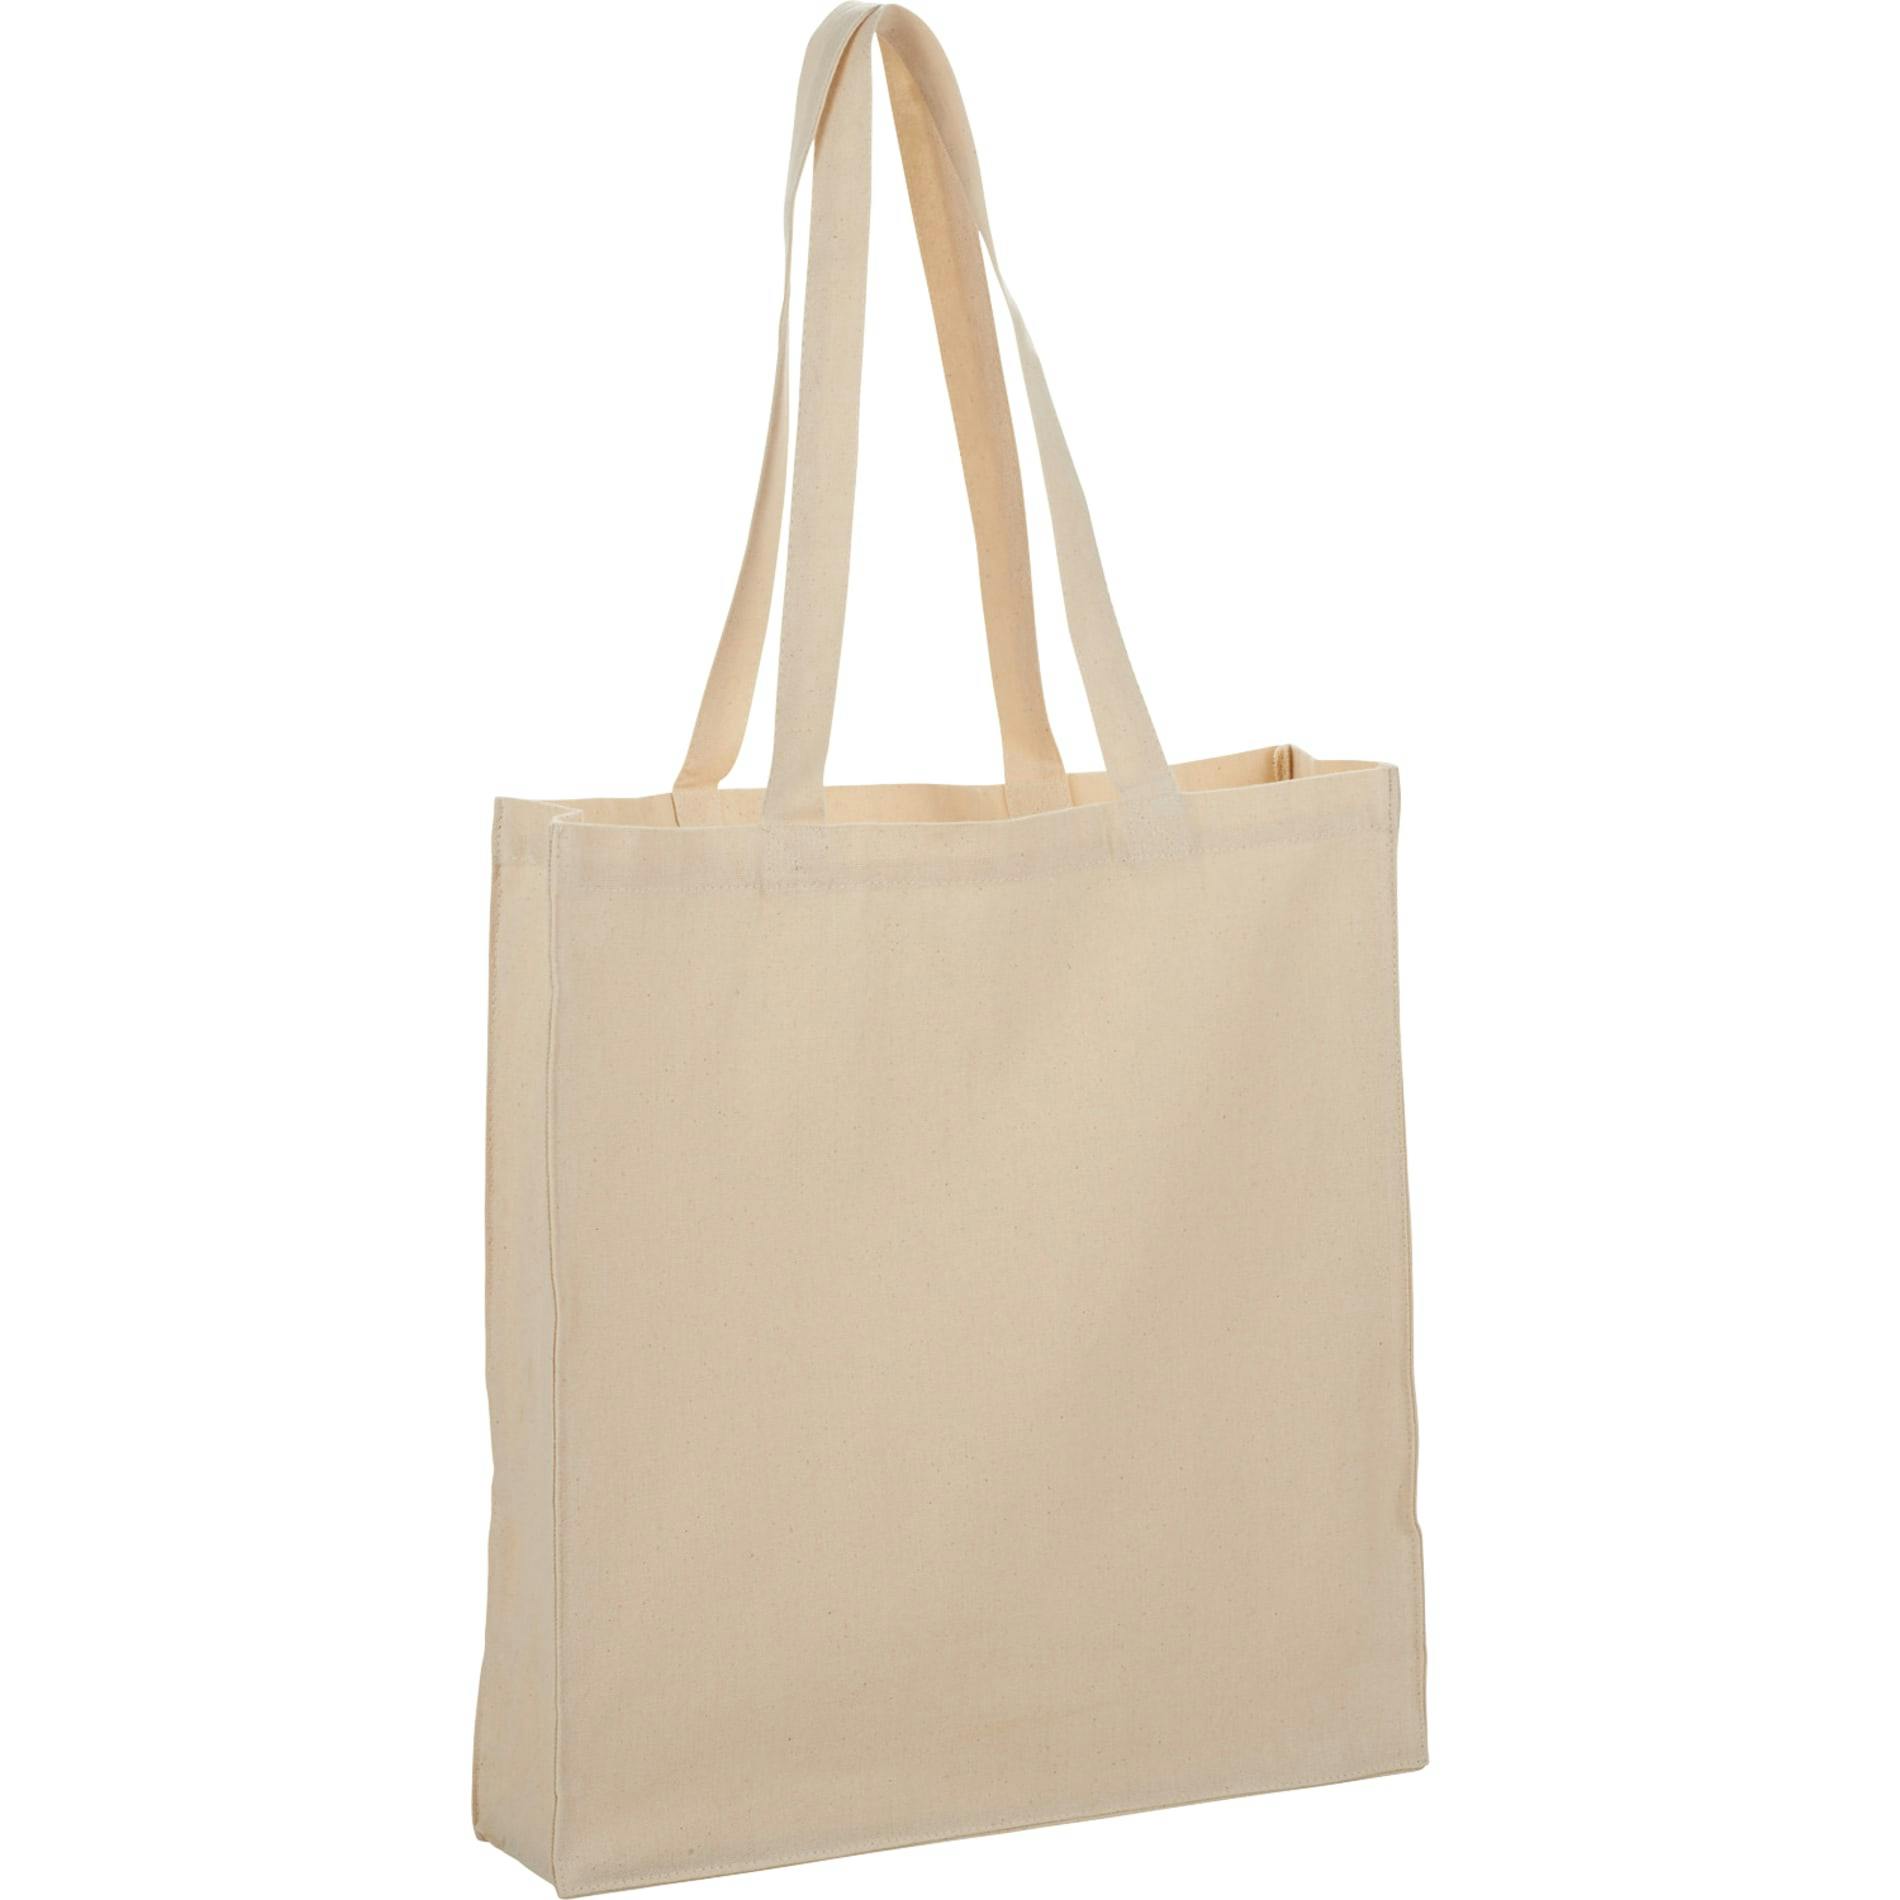 8oz Canvas Tote Bags with Gusset